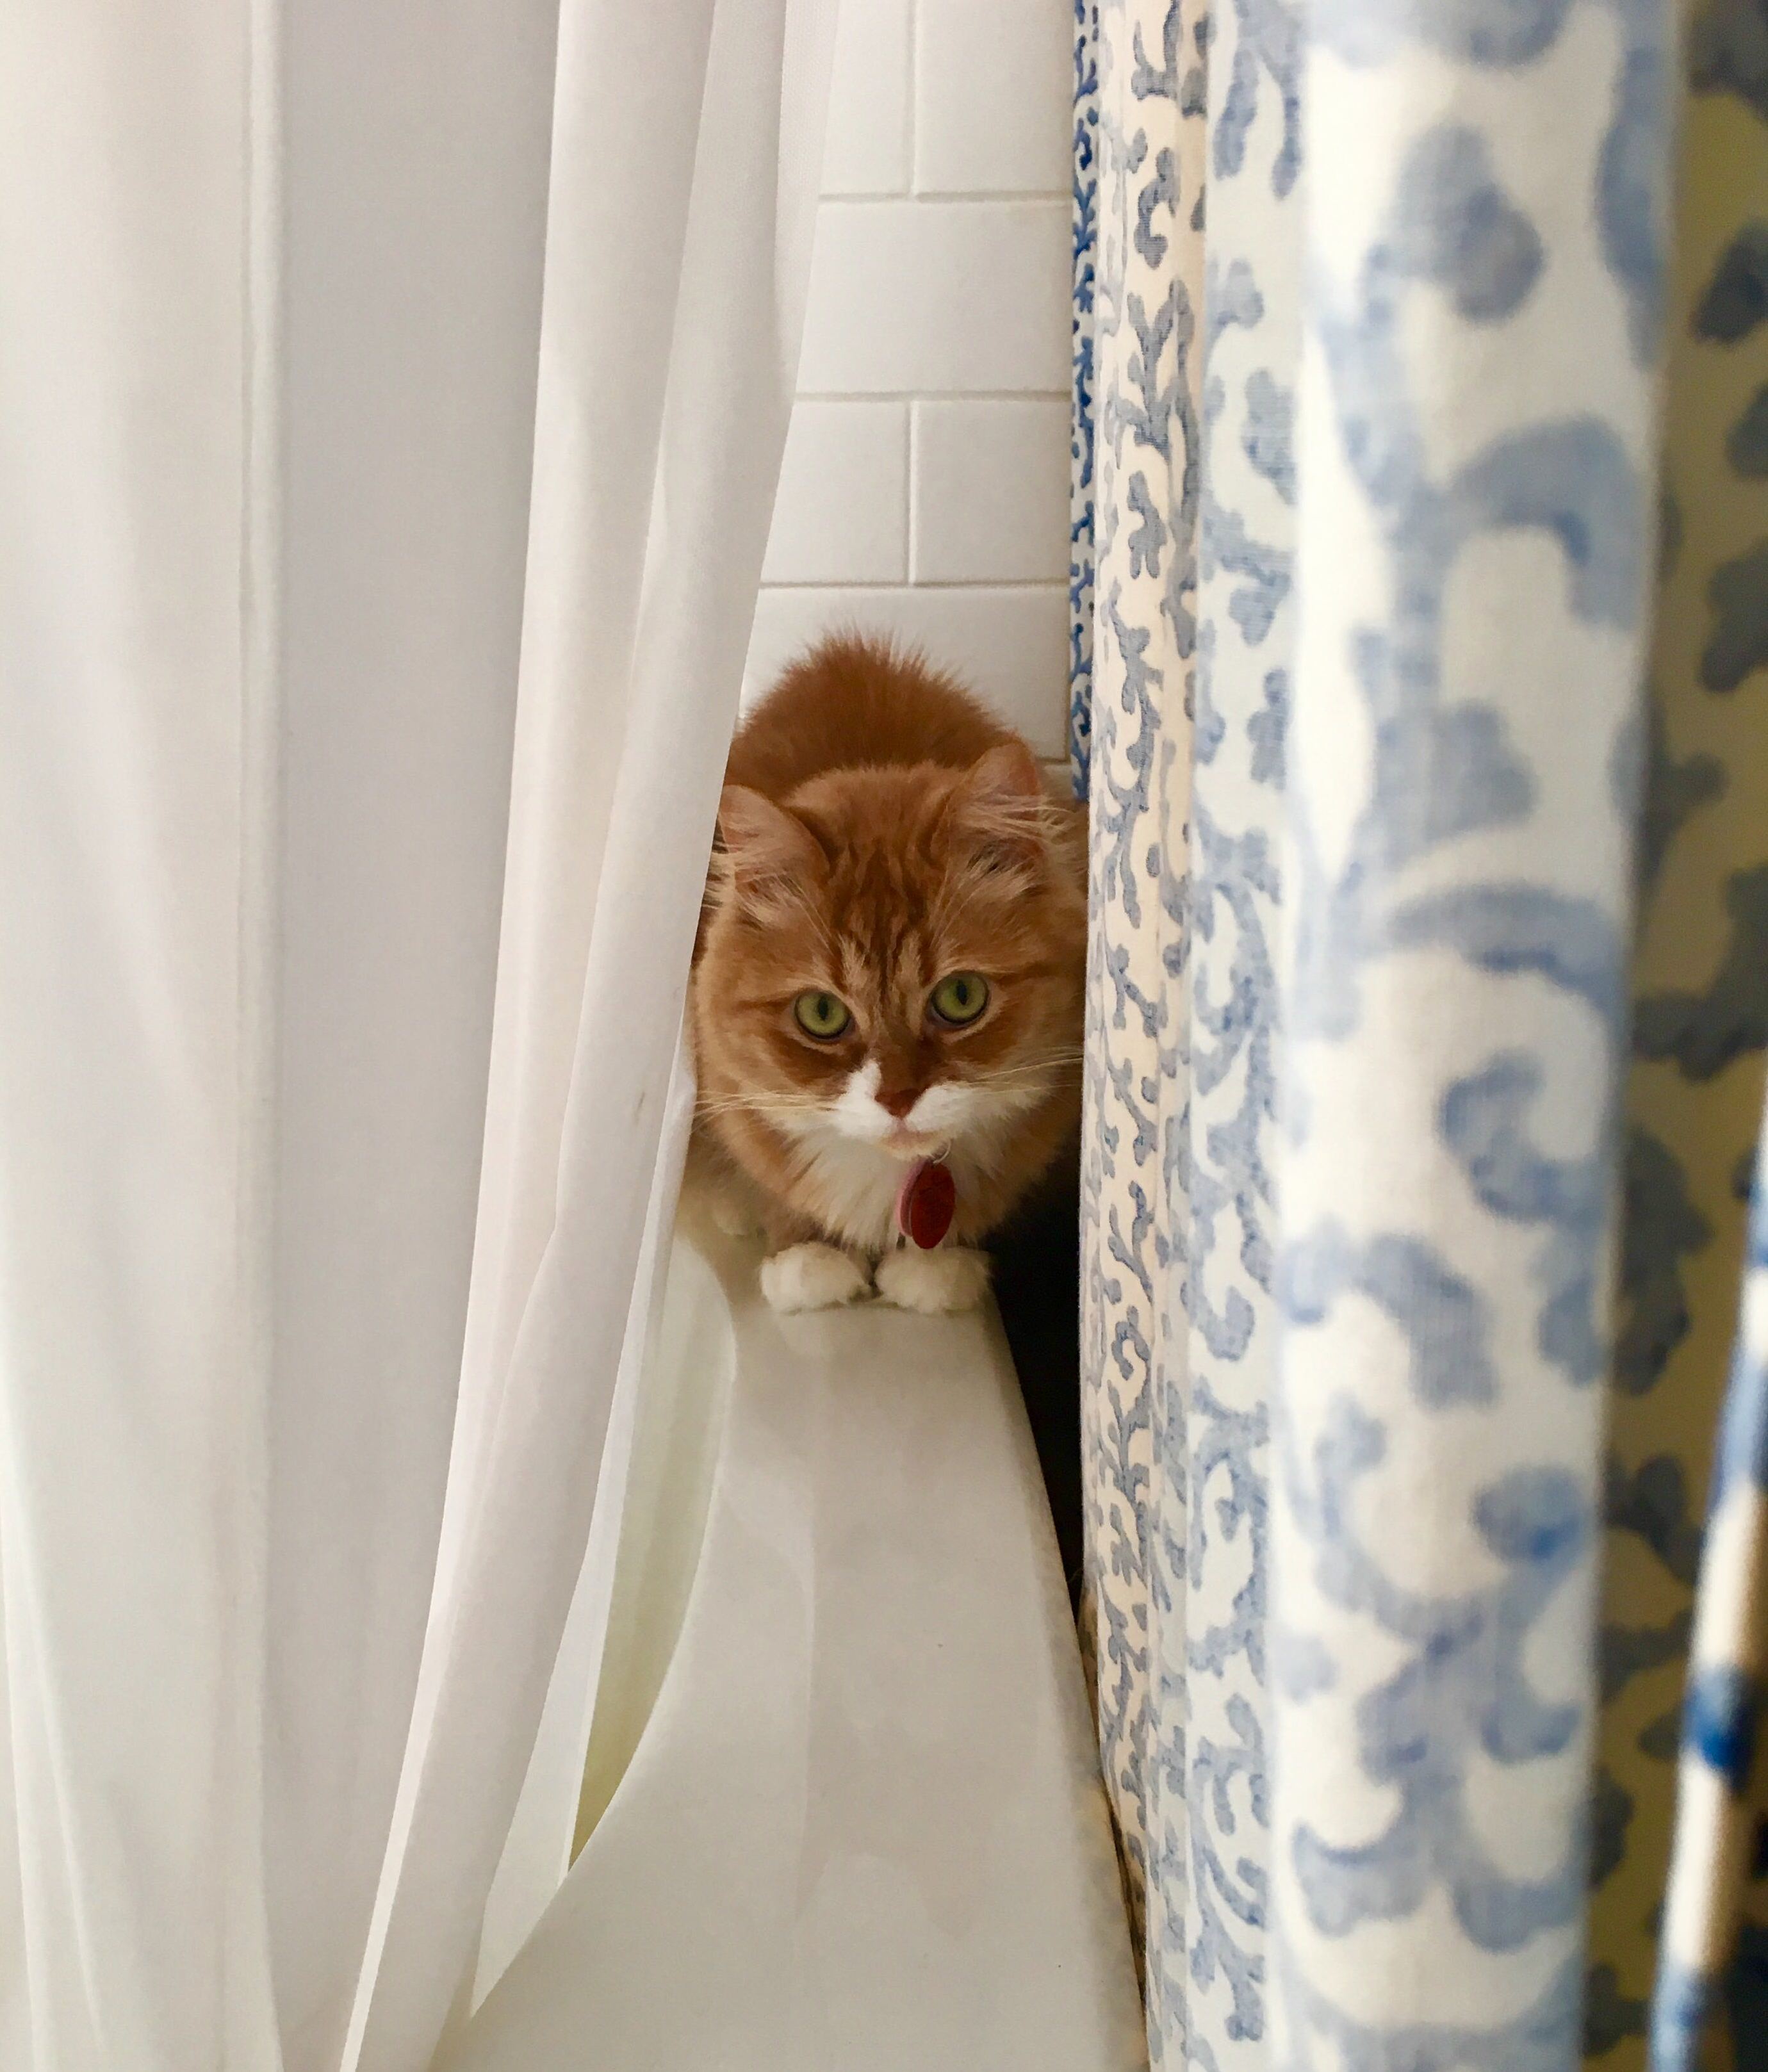 Winston likes to hide between the shower curtains